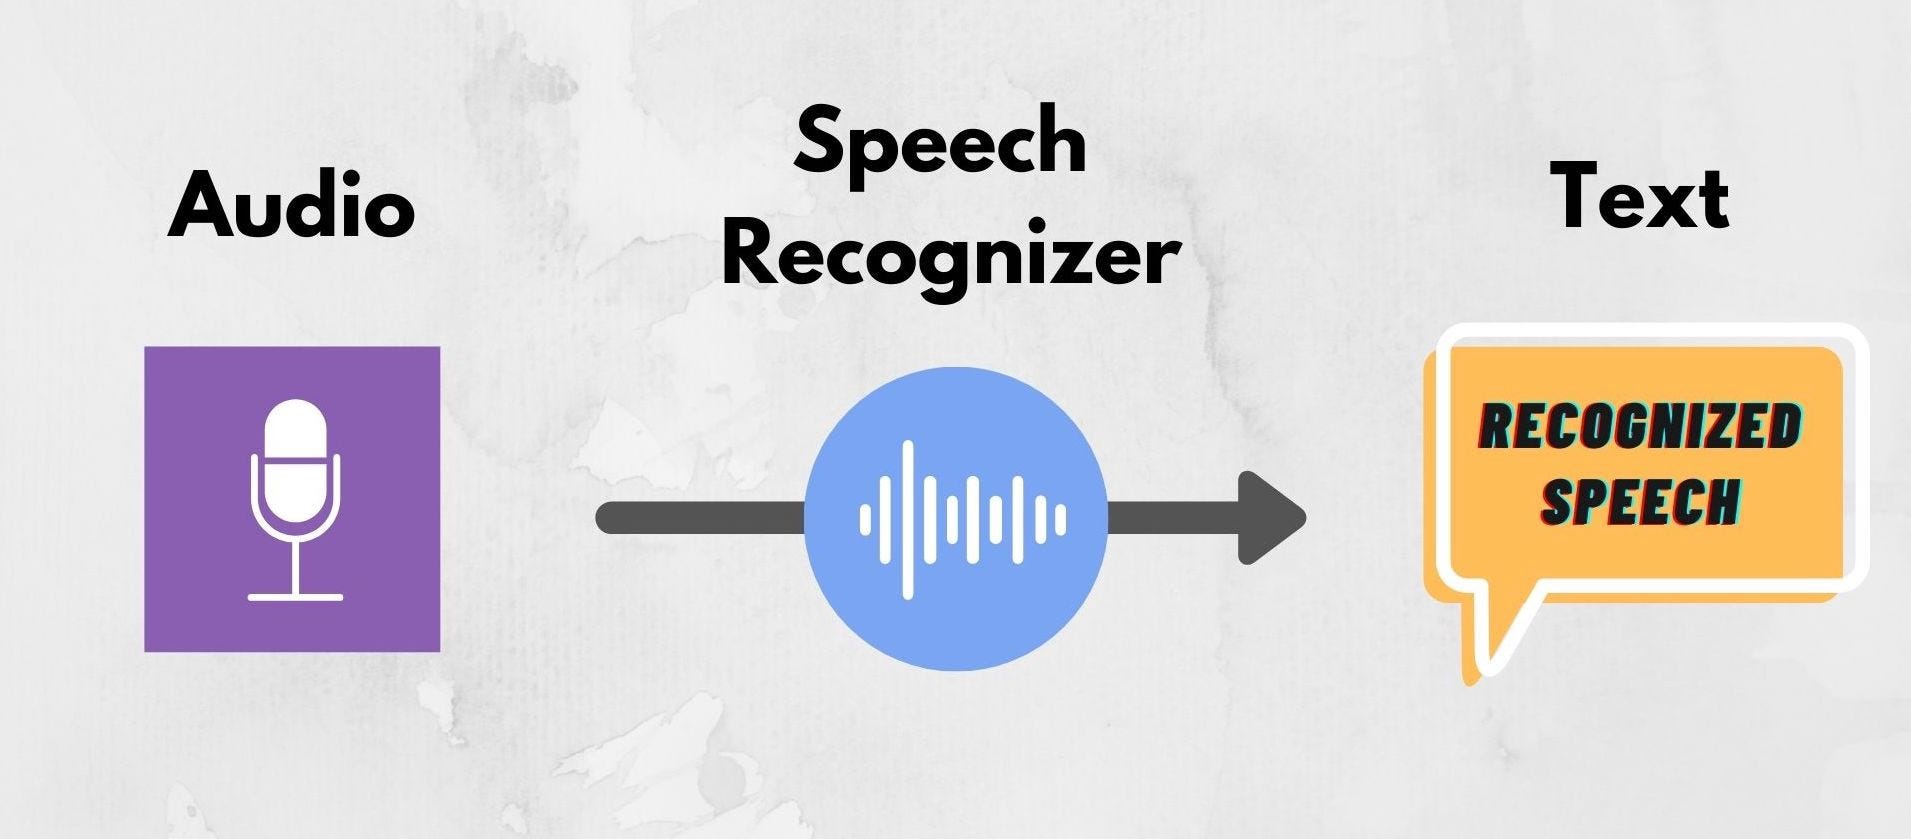 speech recognition definition computer science